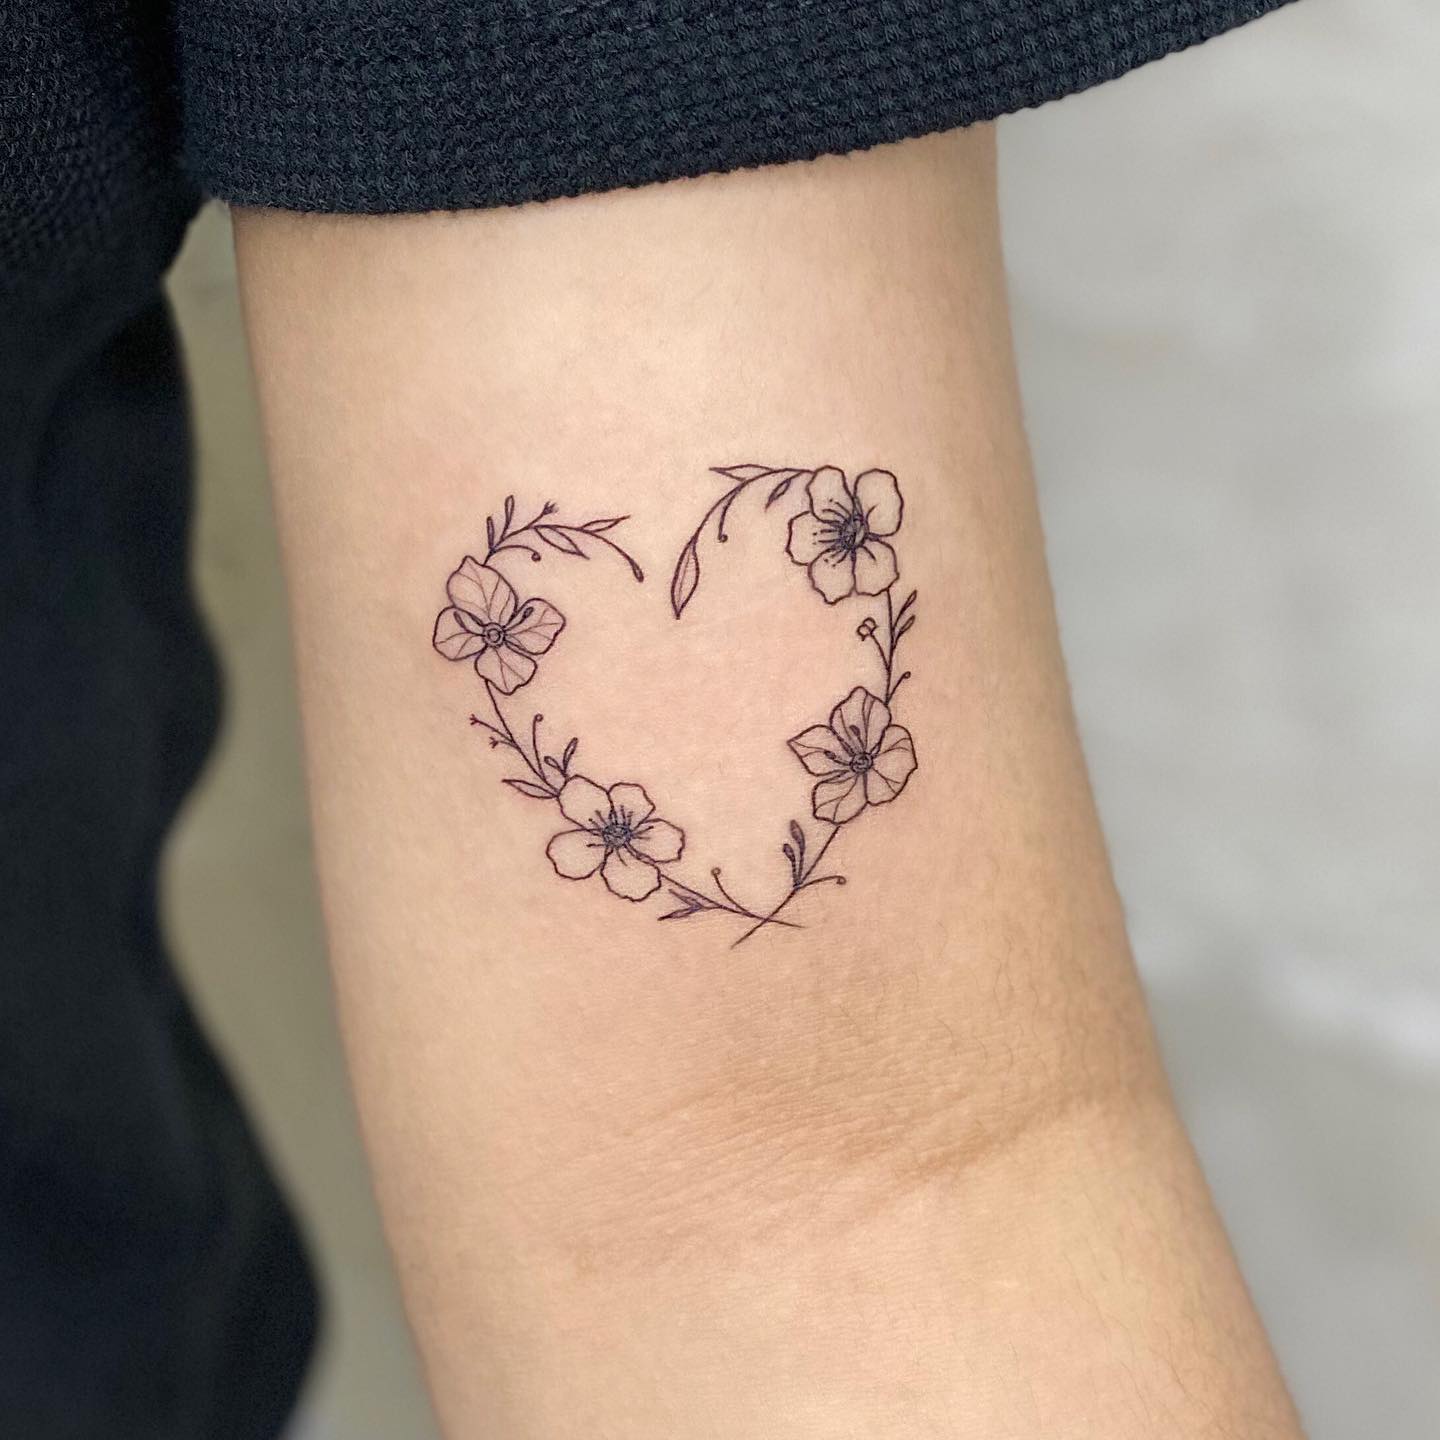 Watercolor heart with flowers made by me  Kyiv Ukraine 2020  rtattoo